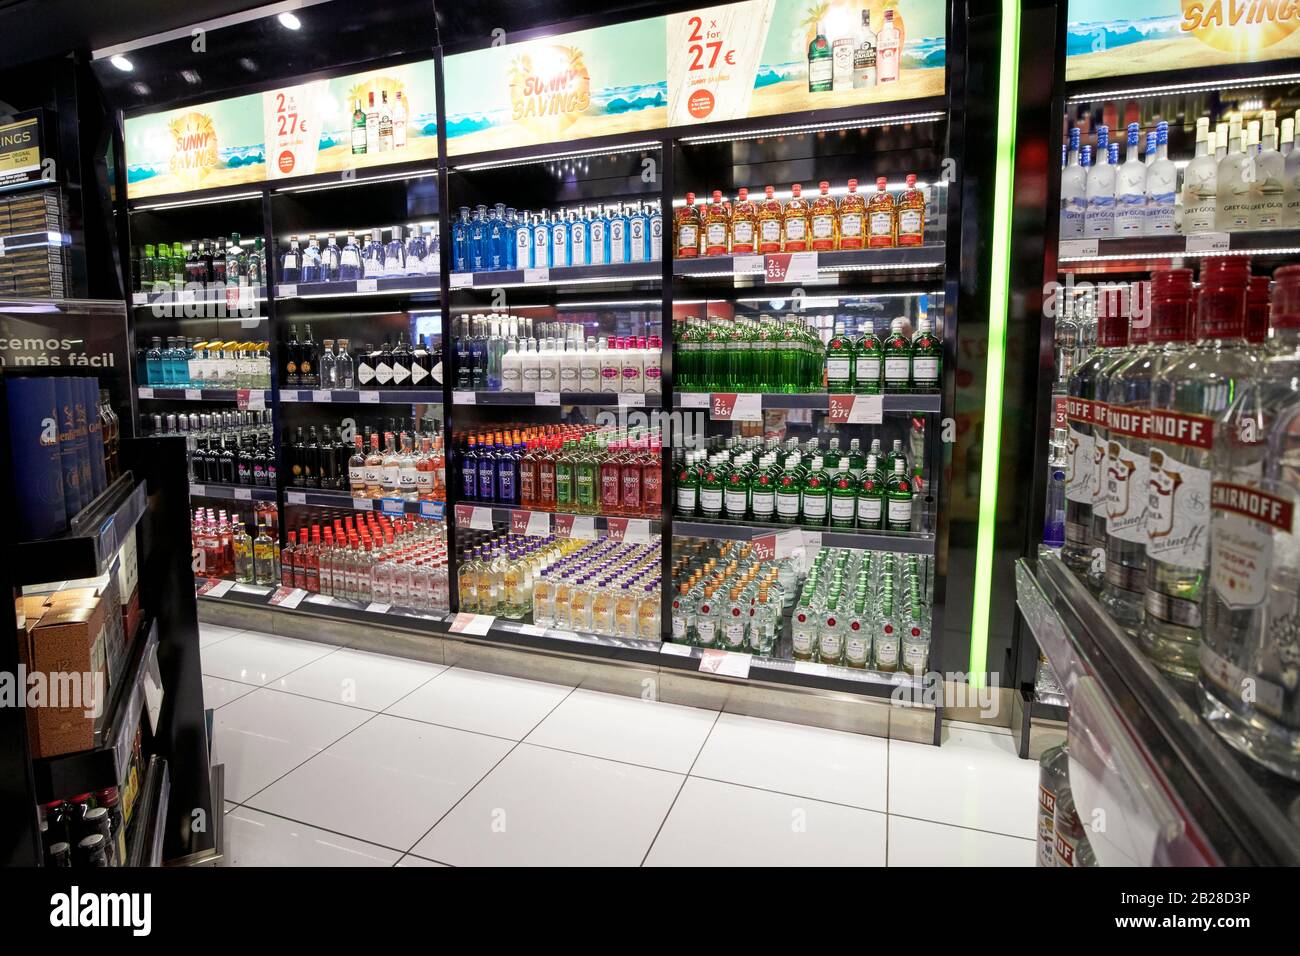 bottles of alcohol for sale at duty free shopping in terminal t1 arricife cesar manrique-Lanzarote airport canary islands spain Stock Photo